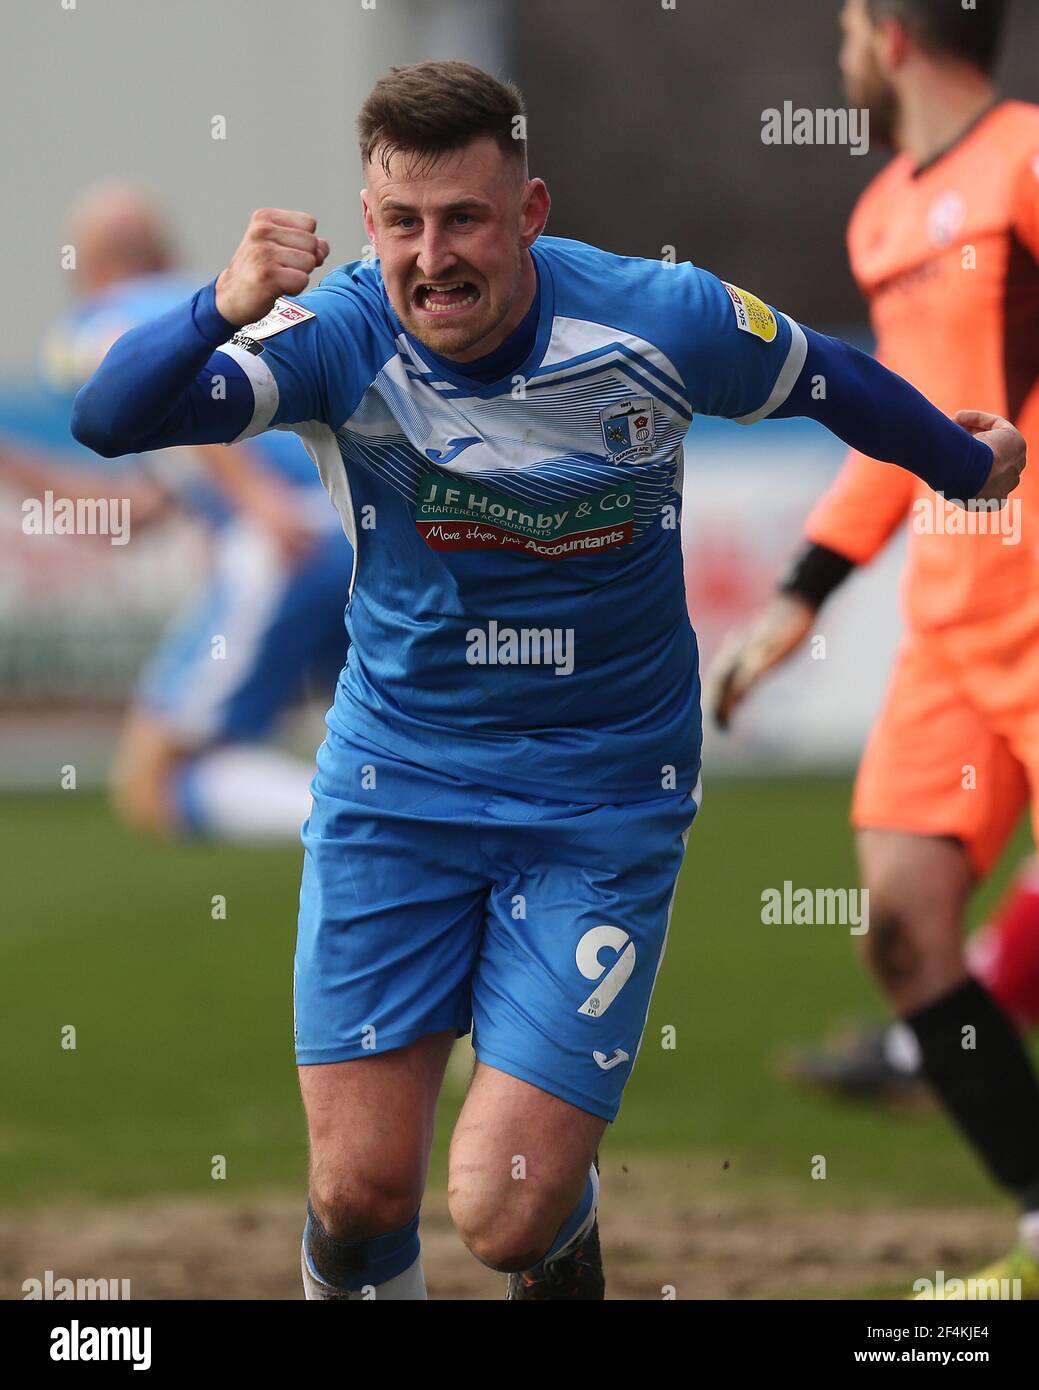 BARROW IN FURNESS, UK. MARCH 20TH: Scott Quigley of Barrow celebrates after  scoring their third and winning goal during the Sky Bet League 2 match  between Barrow and Crawley Town at the